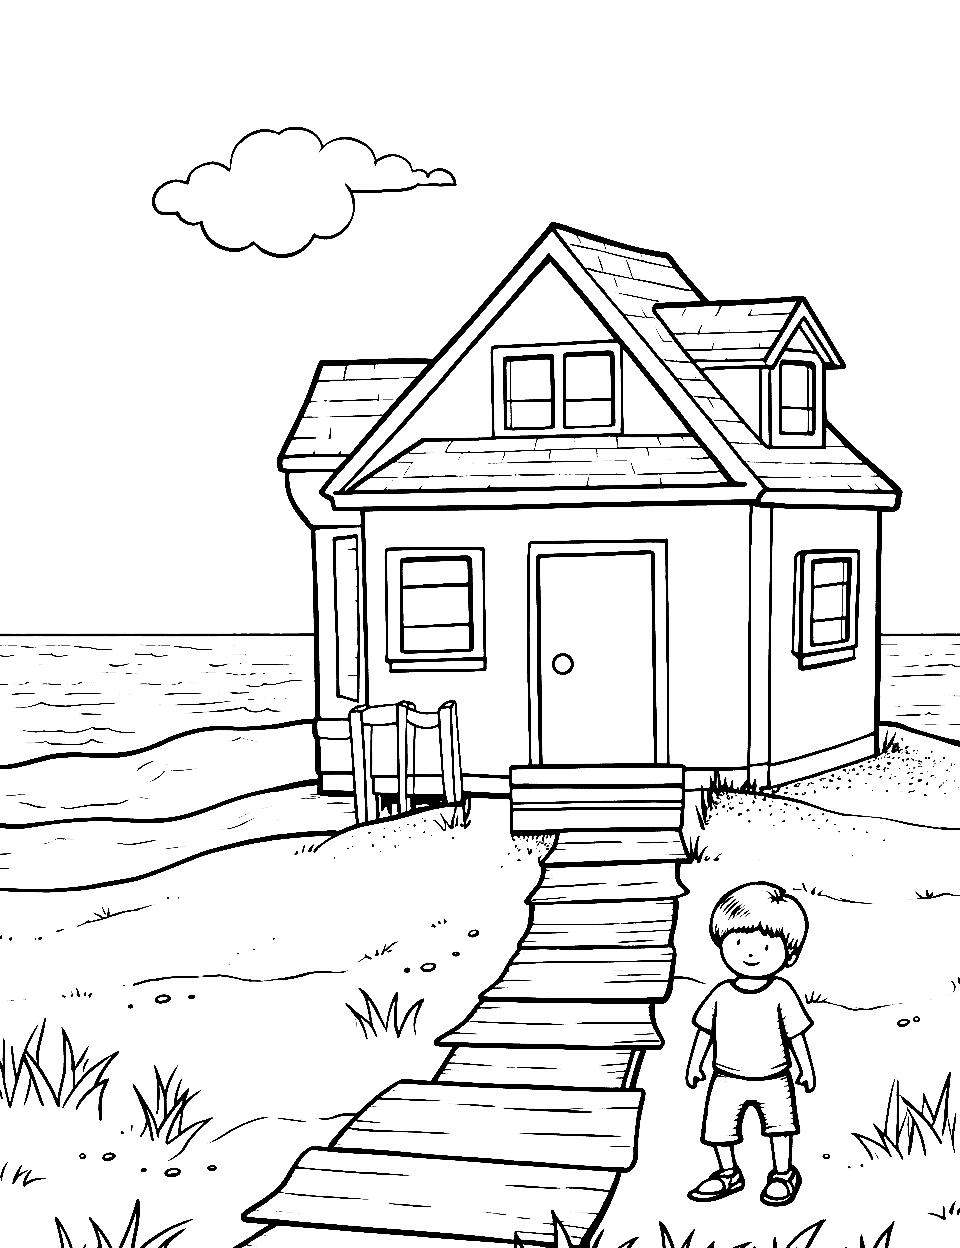 Playful Beach Day Coloring Page - A beach house with a child playing outside.